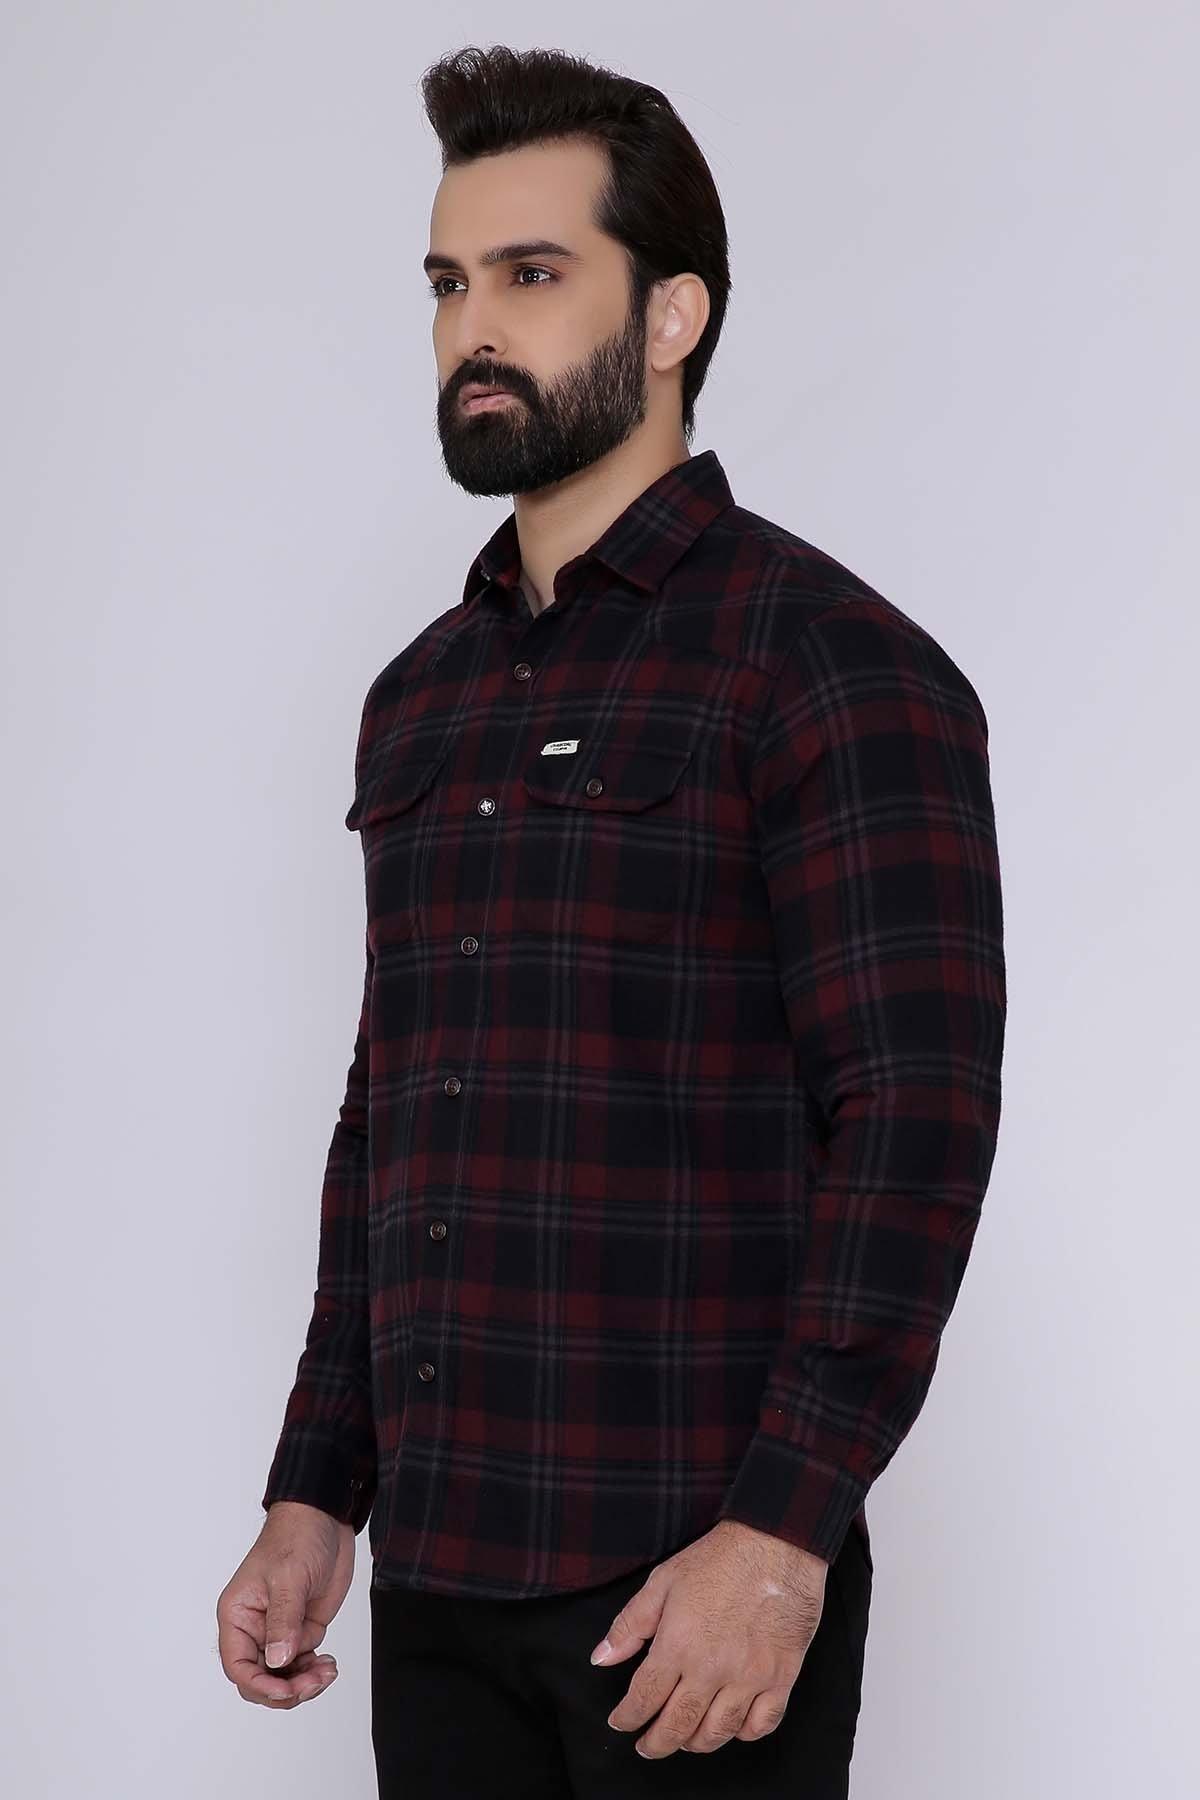 CASUAL SHIRT FULL SLEEVE BLACK SLIM FIT at Charcoal Clothing